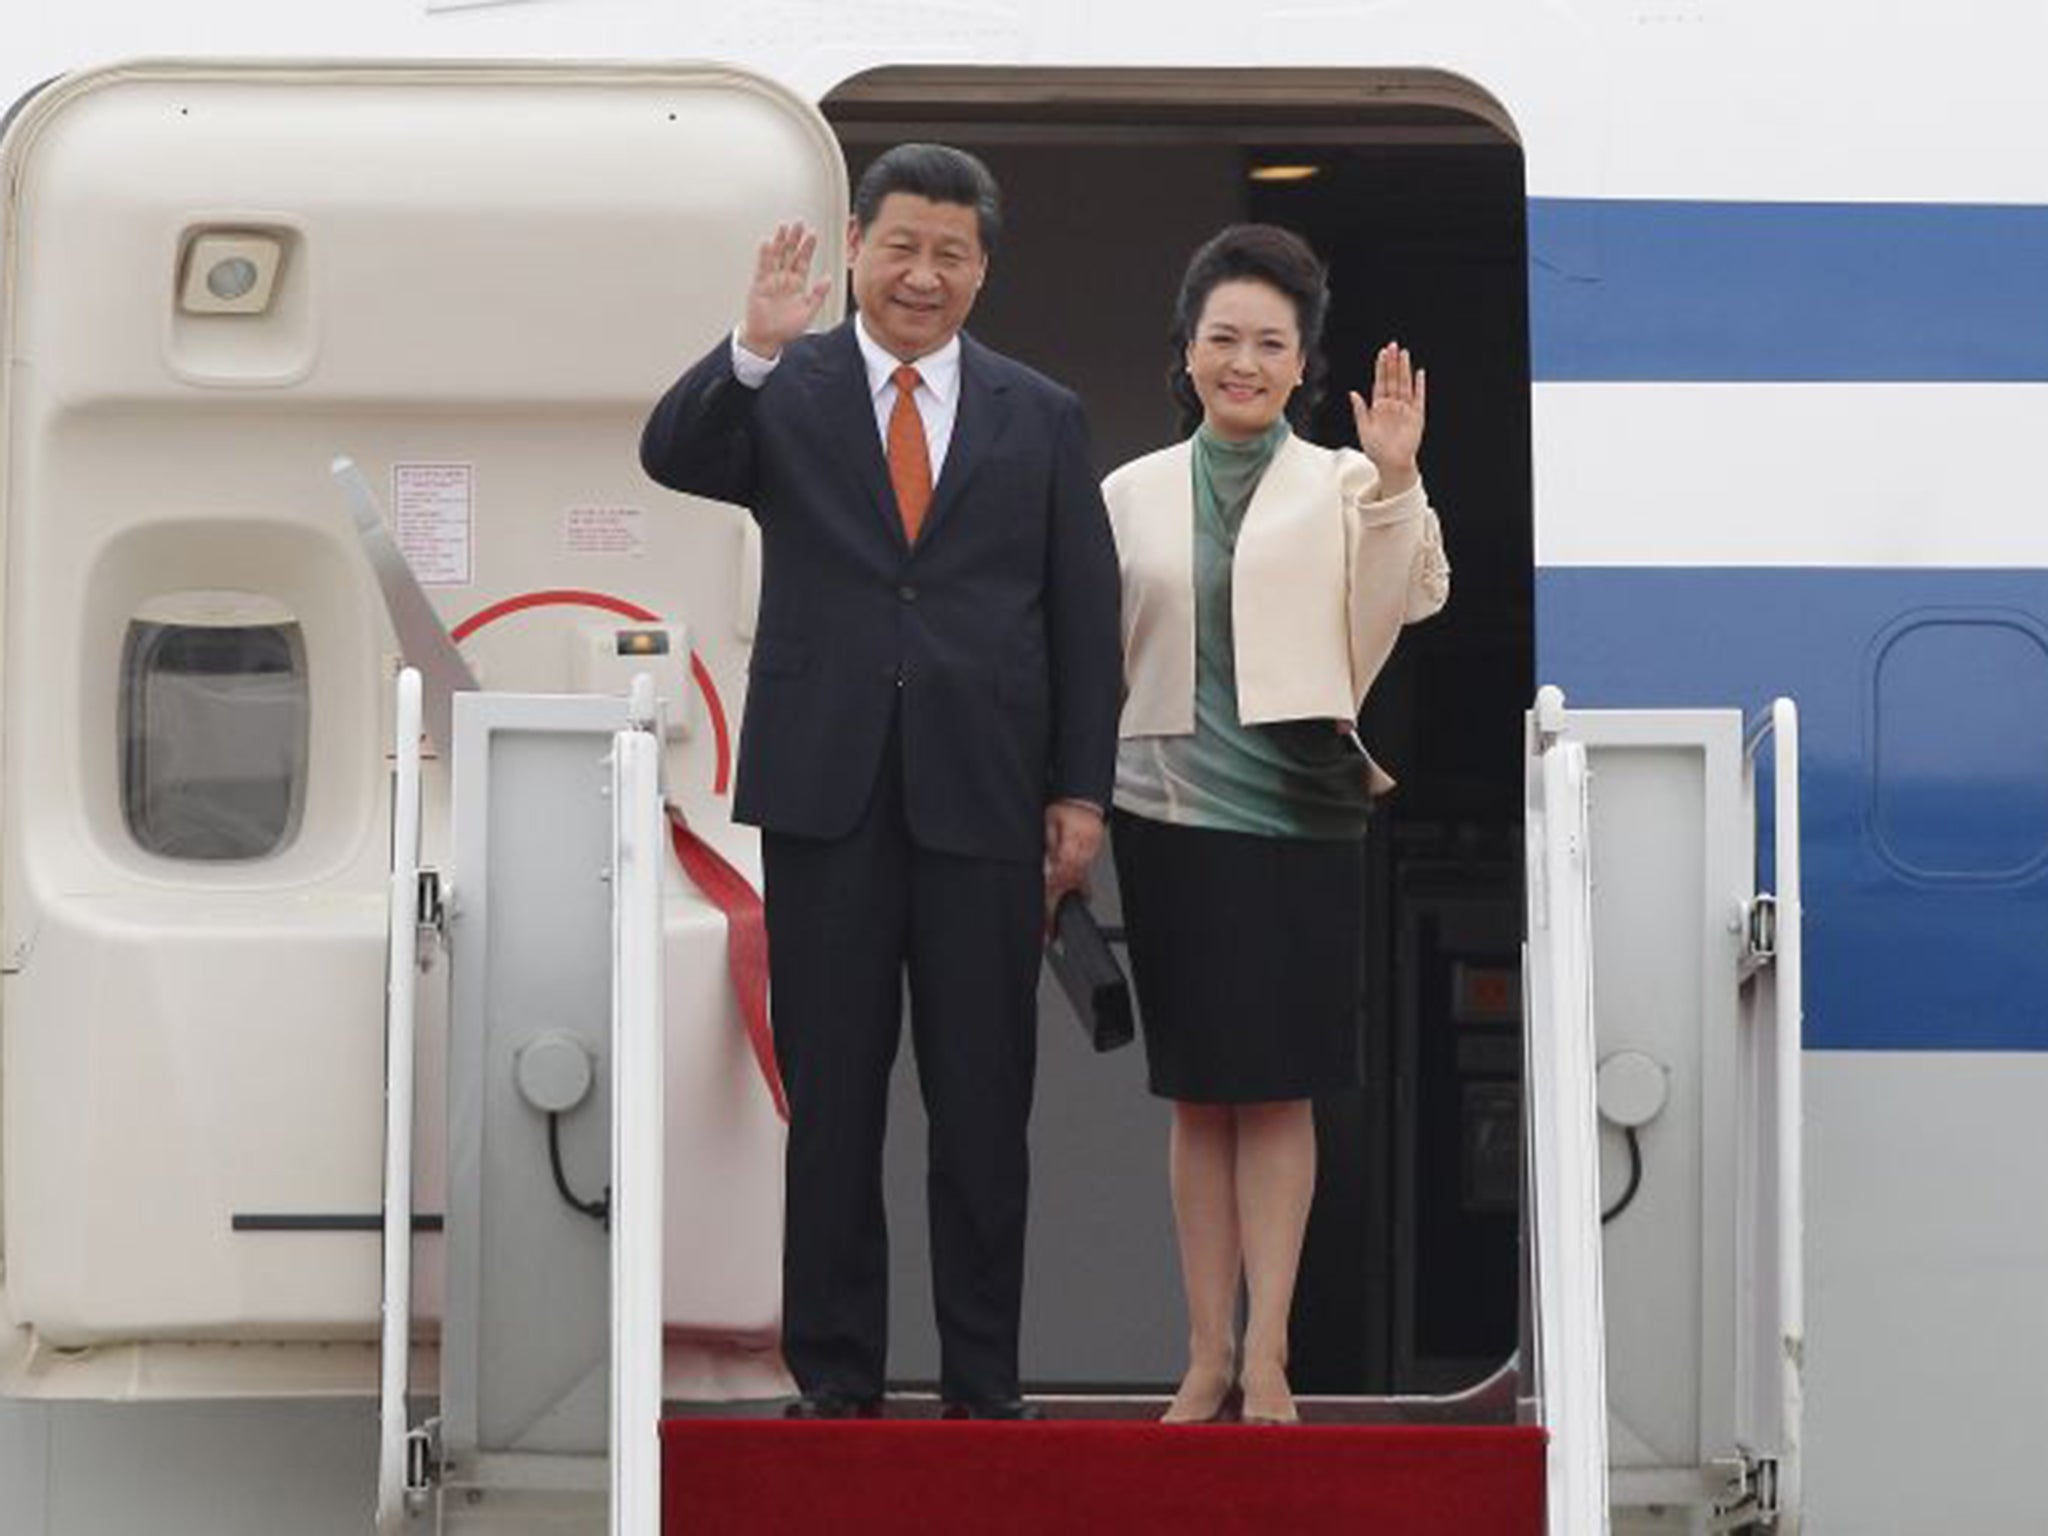 President Xi Jinping and his wife Peng Liyuan are due in the UK on Tuesday